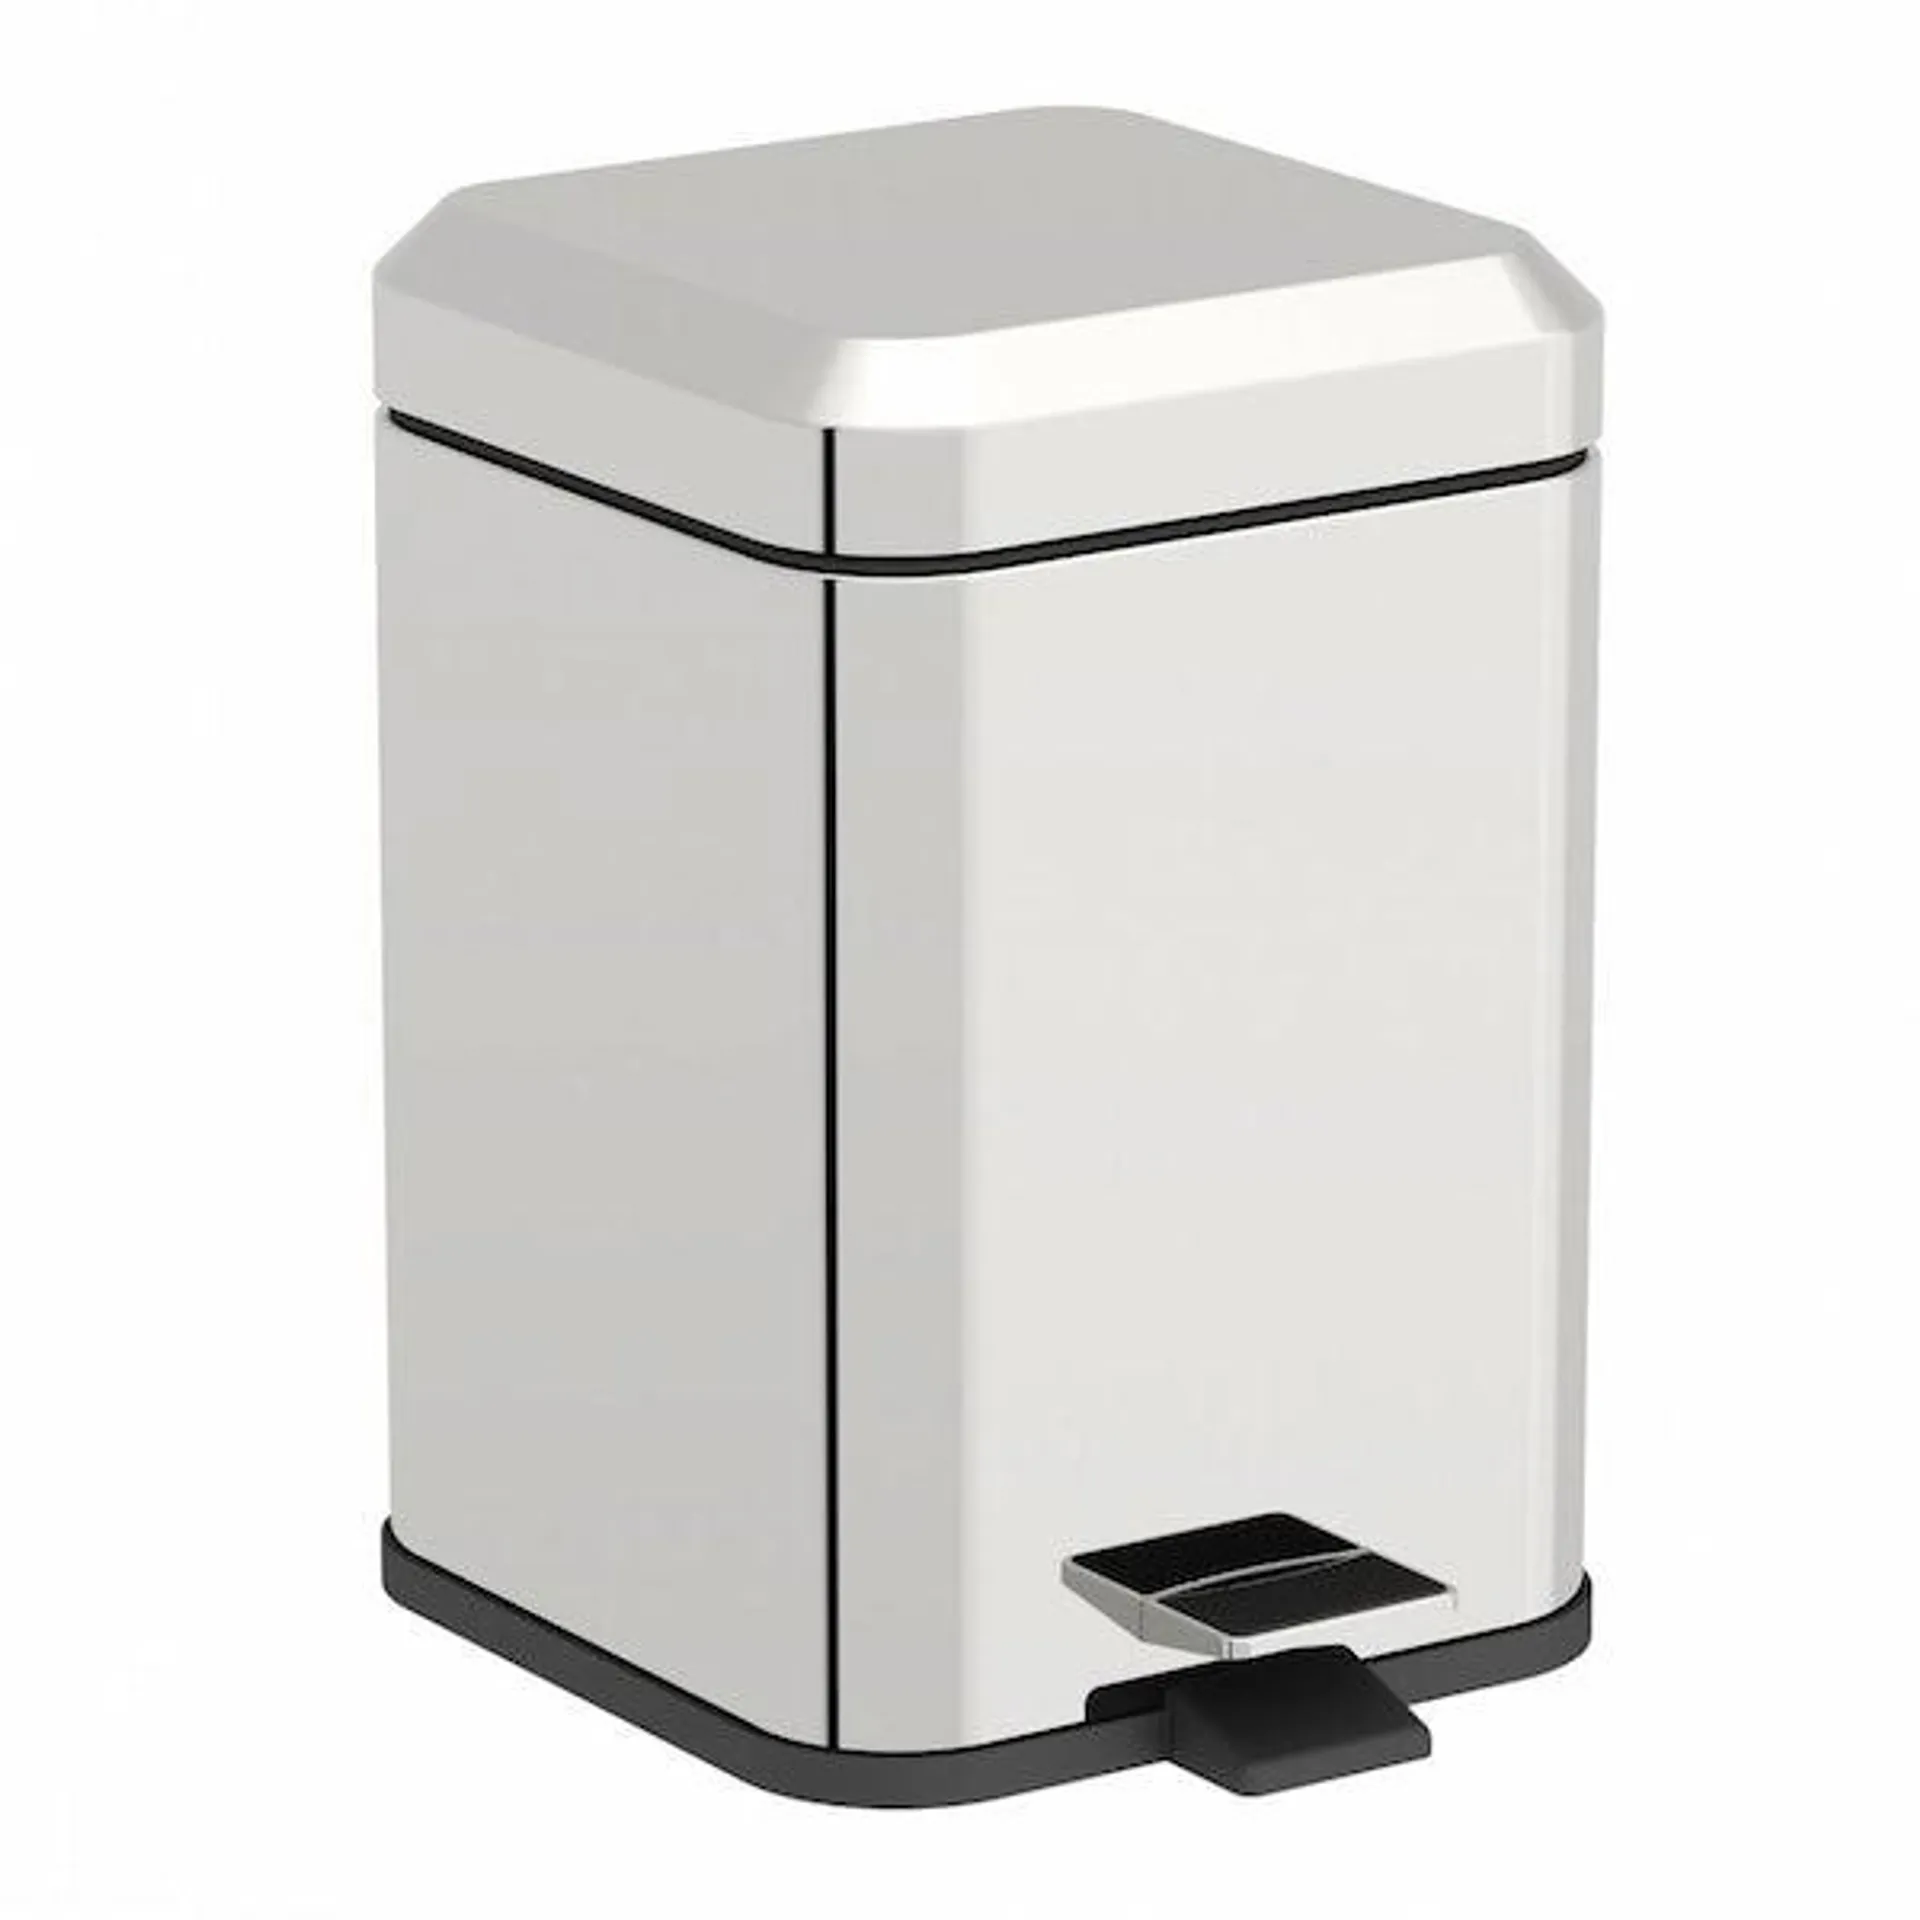 Accents Options square stainless steel bathroom bin 6 litre